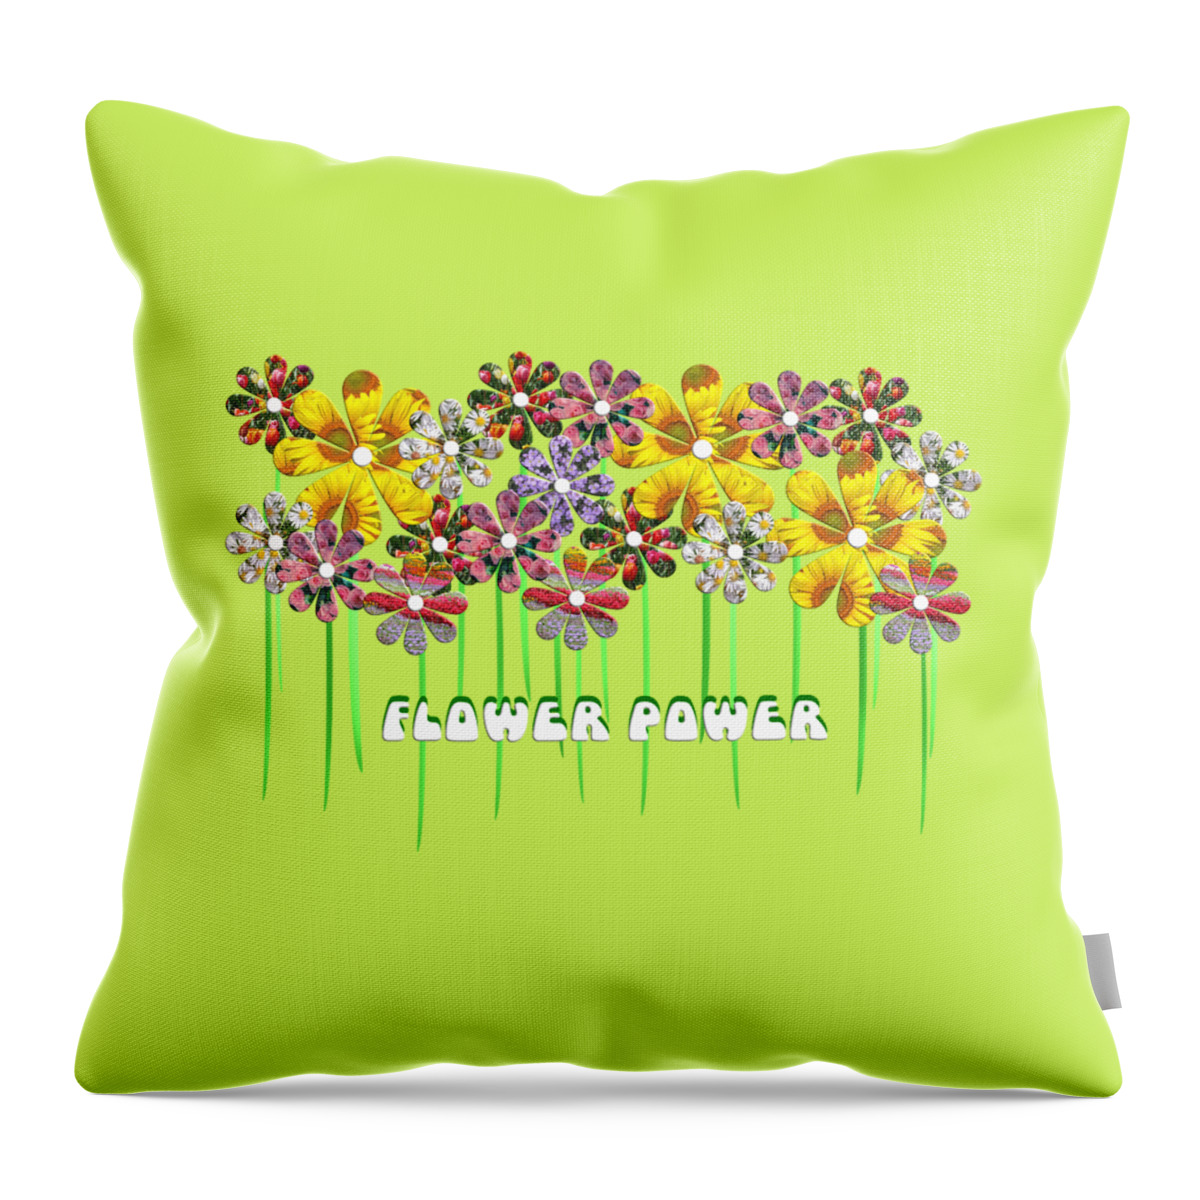 Flowers Throw Pillow featuring the digital art Flower Power with Text Quote by Barefoot Bodeez Art